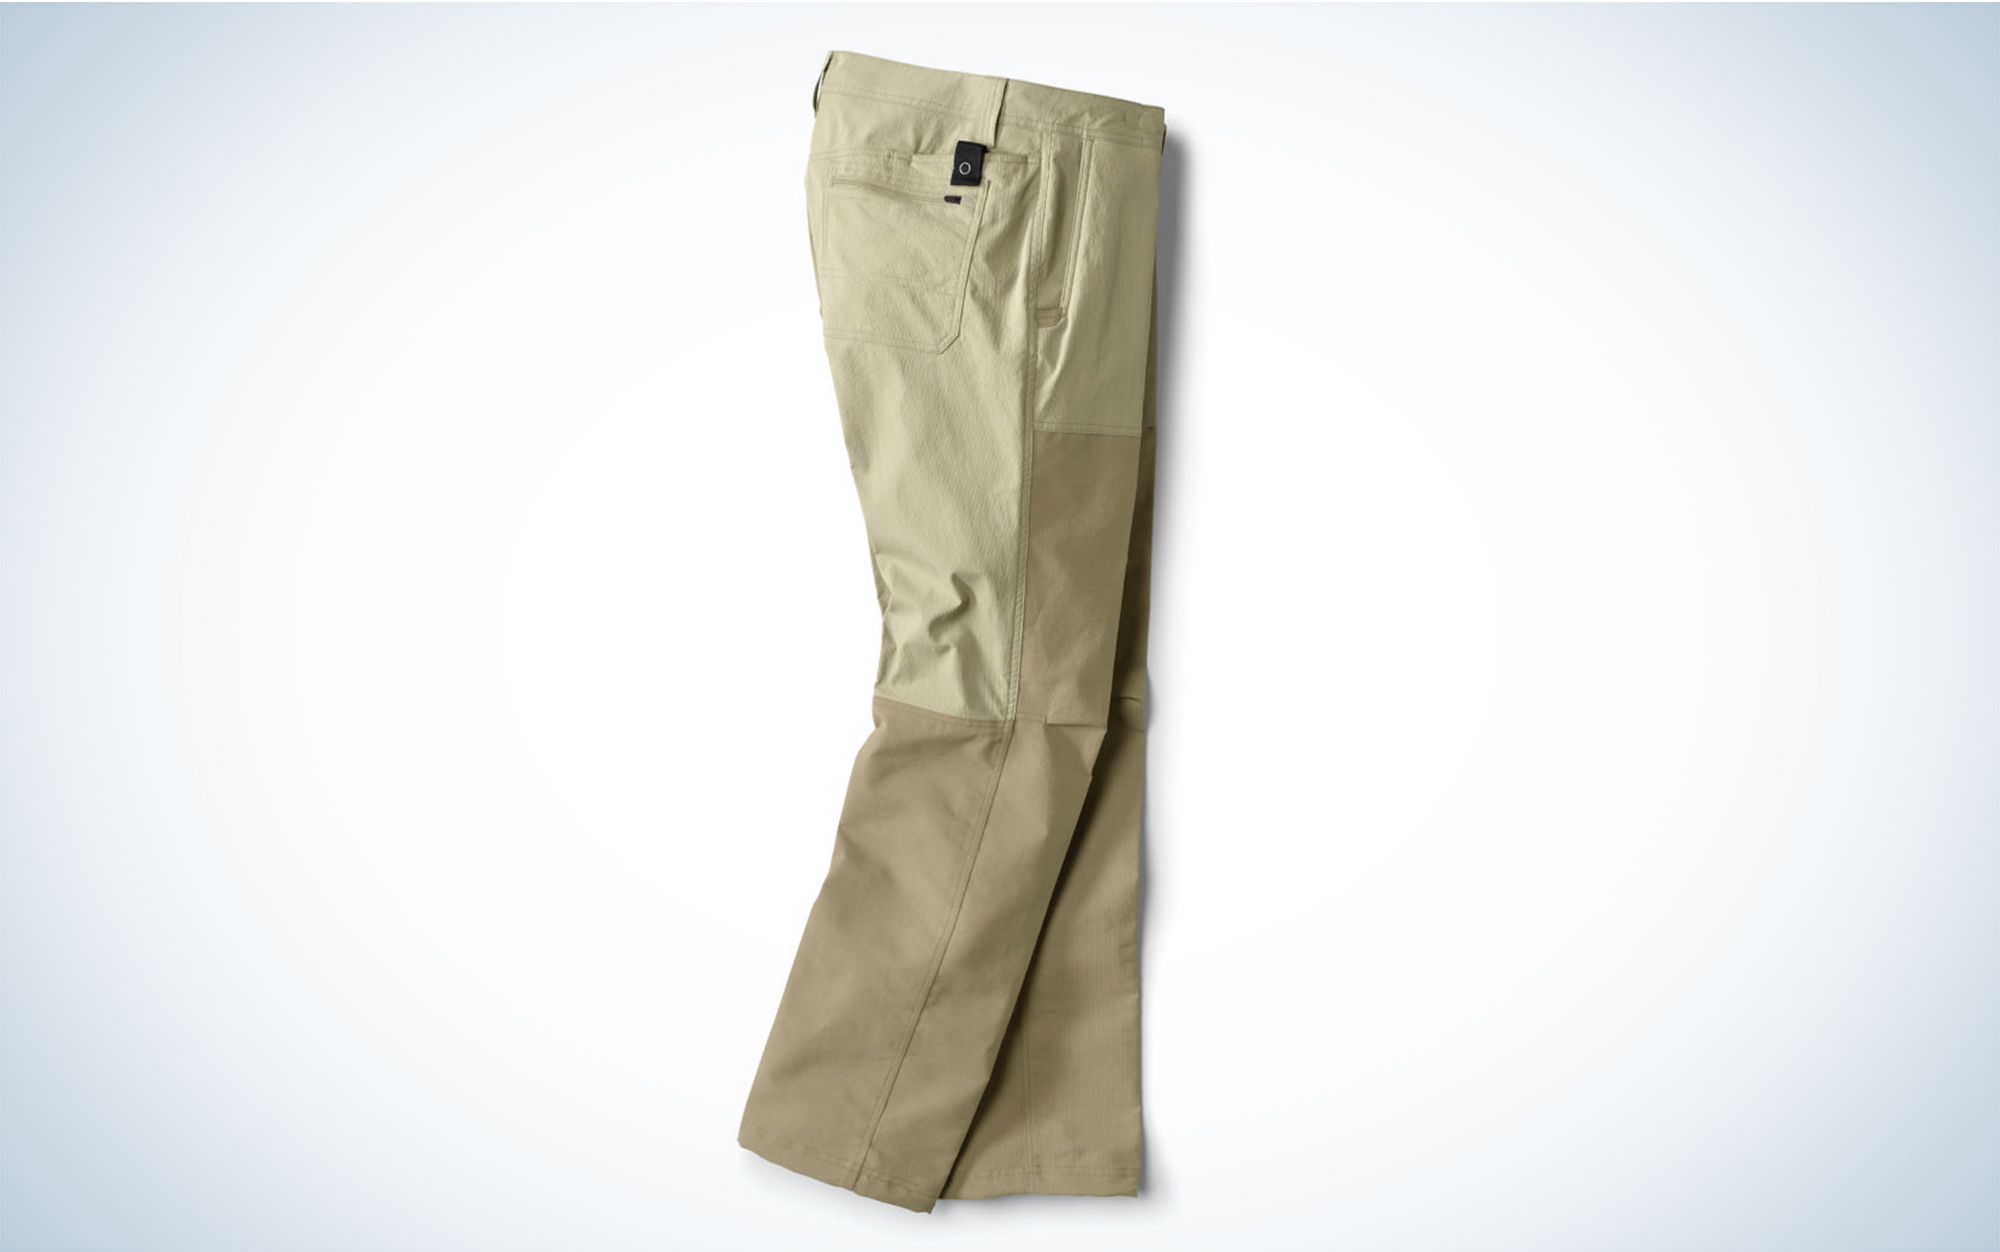 The Orvis Women's PRO LT hunting pants are lightweight.